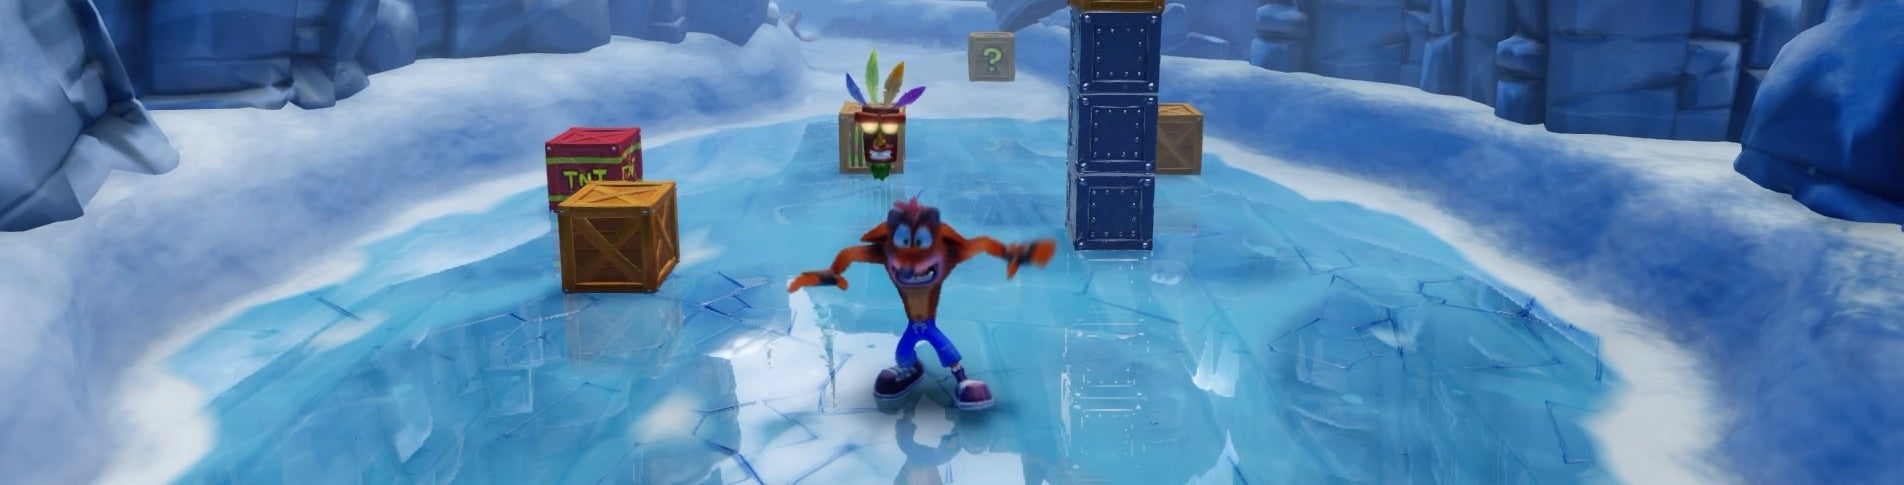 Image for The Crash Bandicoot N Sane Trilogy is nostalgia done right - and that includes the irritations